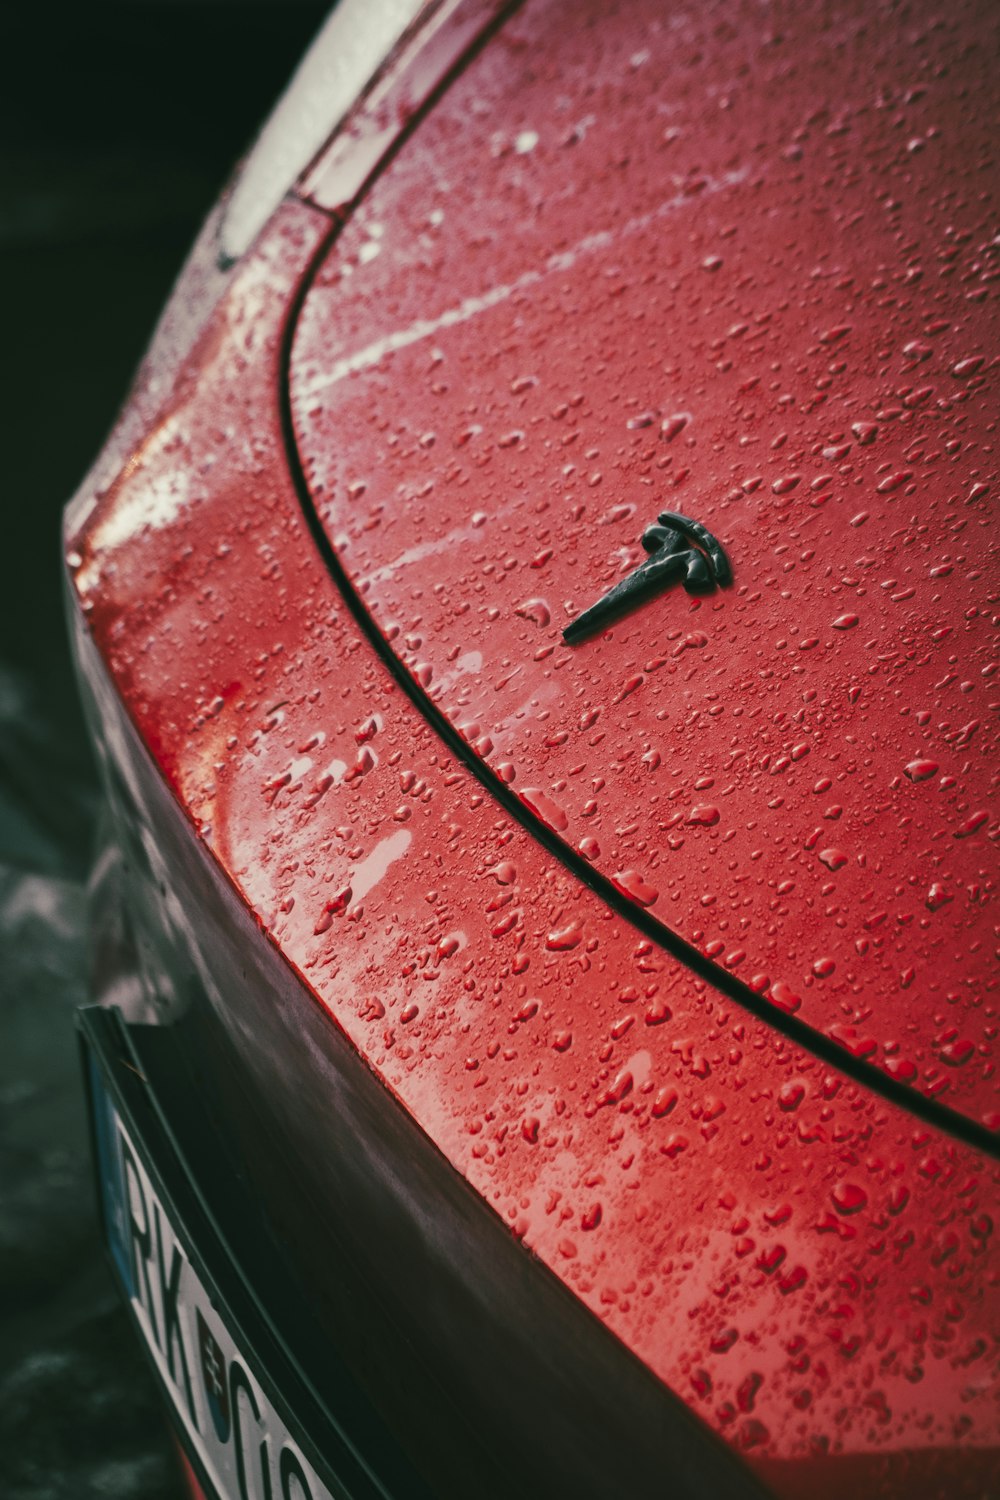 a close up of a red car with water droplets on it